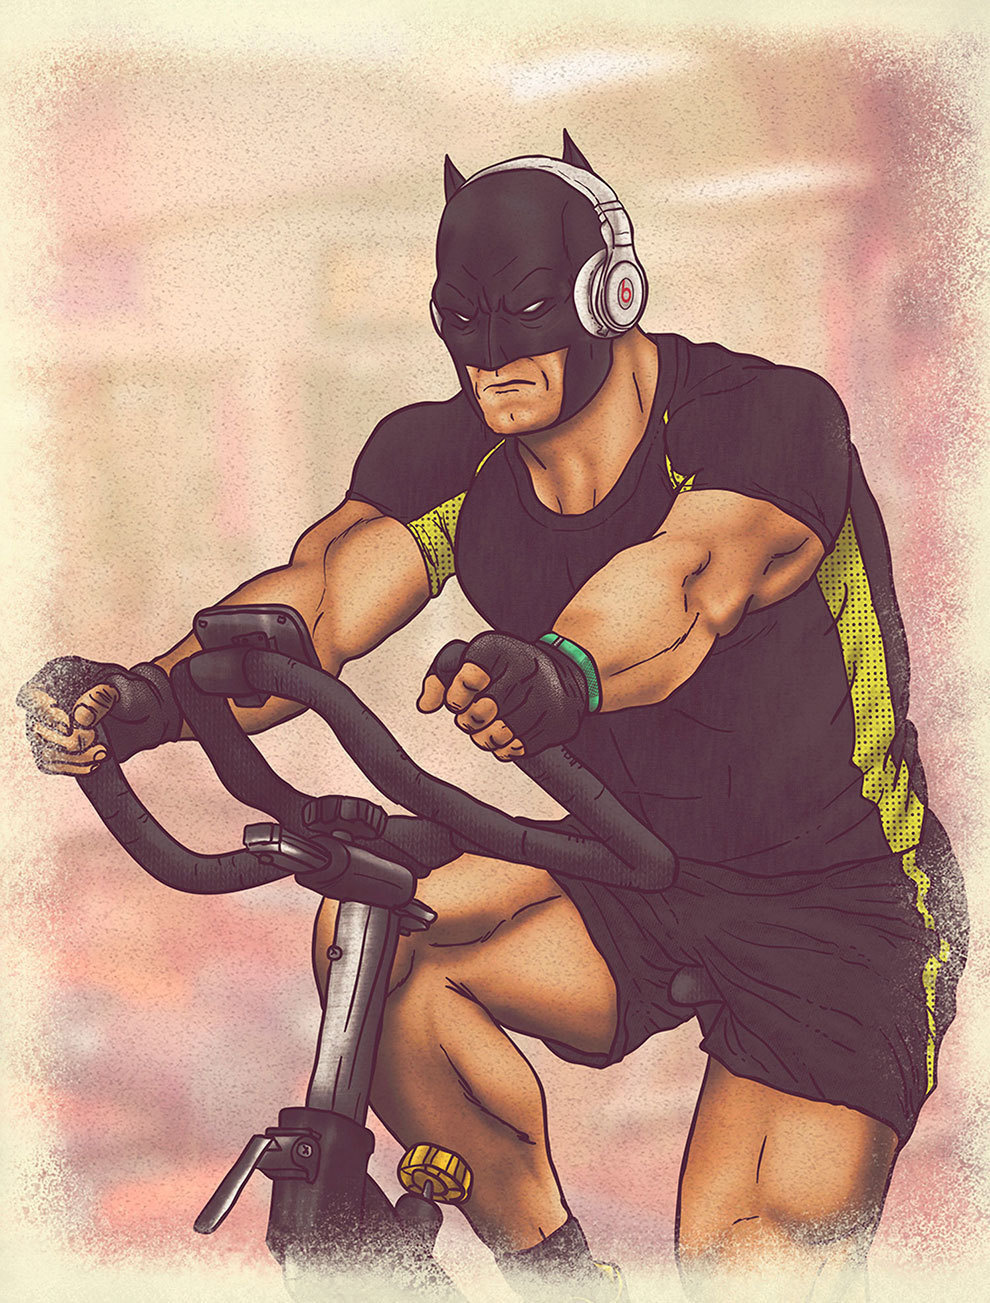 Batman has got to spend a bit of time on his cardio every day.